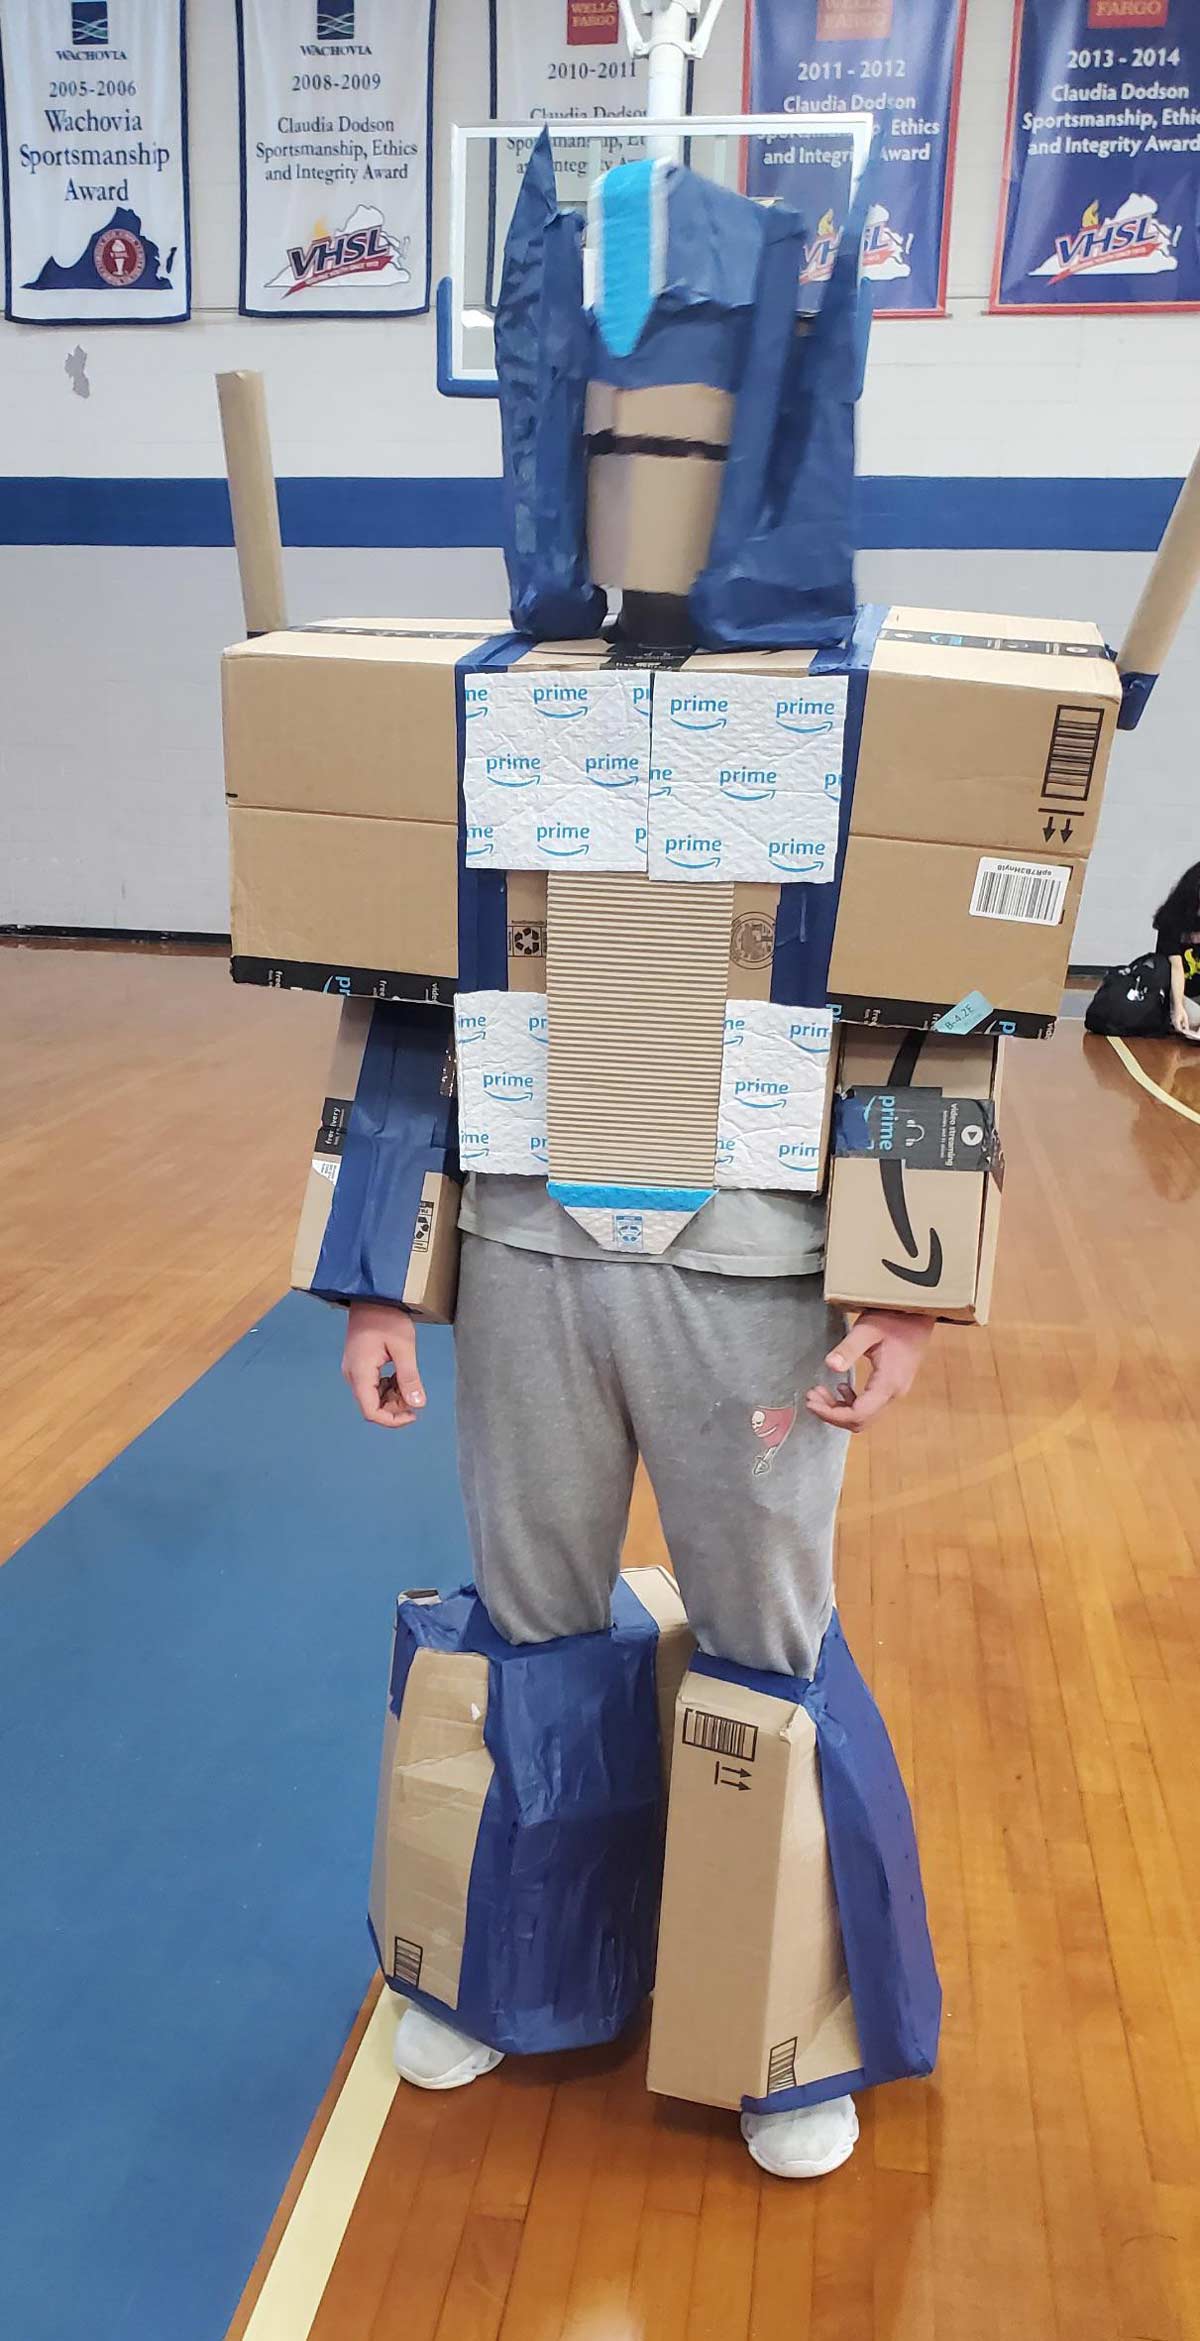 One of the kids dressed up as Amazon Prime